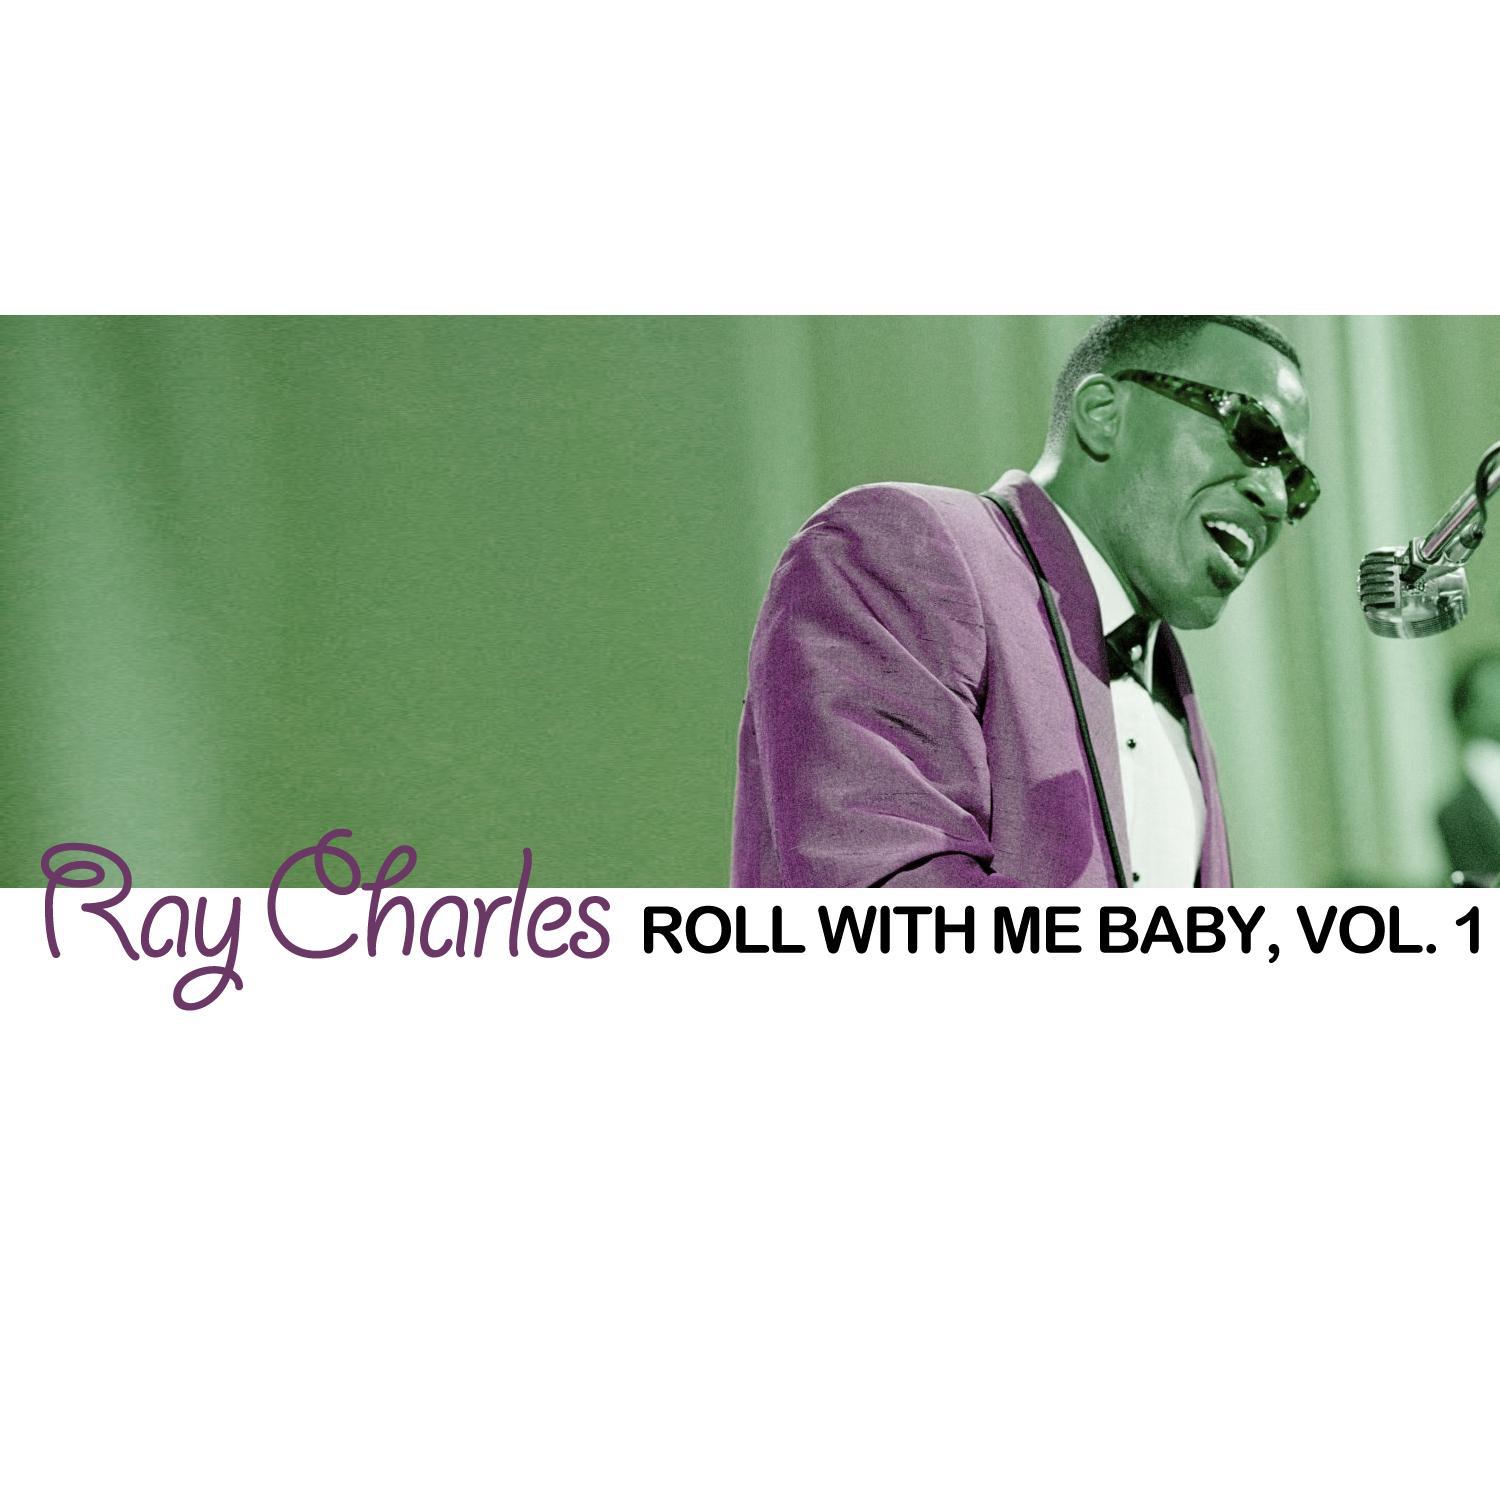 Roll with Me Baby, Vol. 1专辑